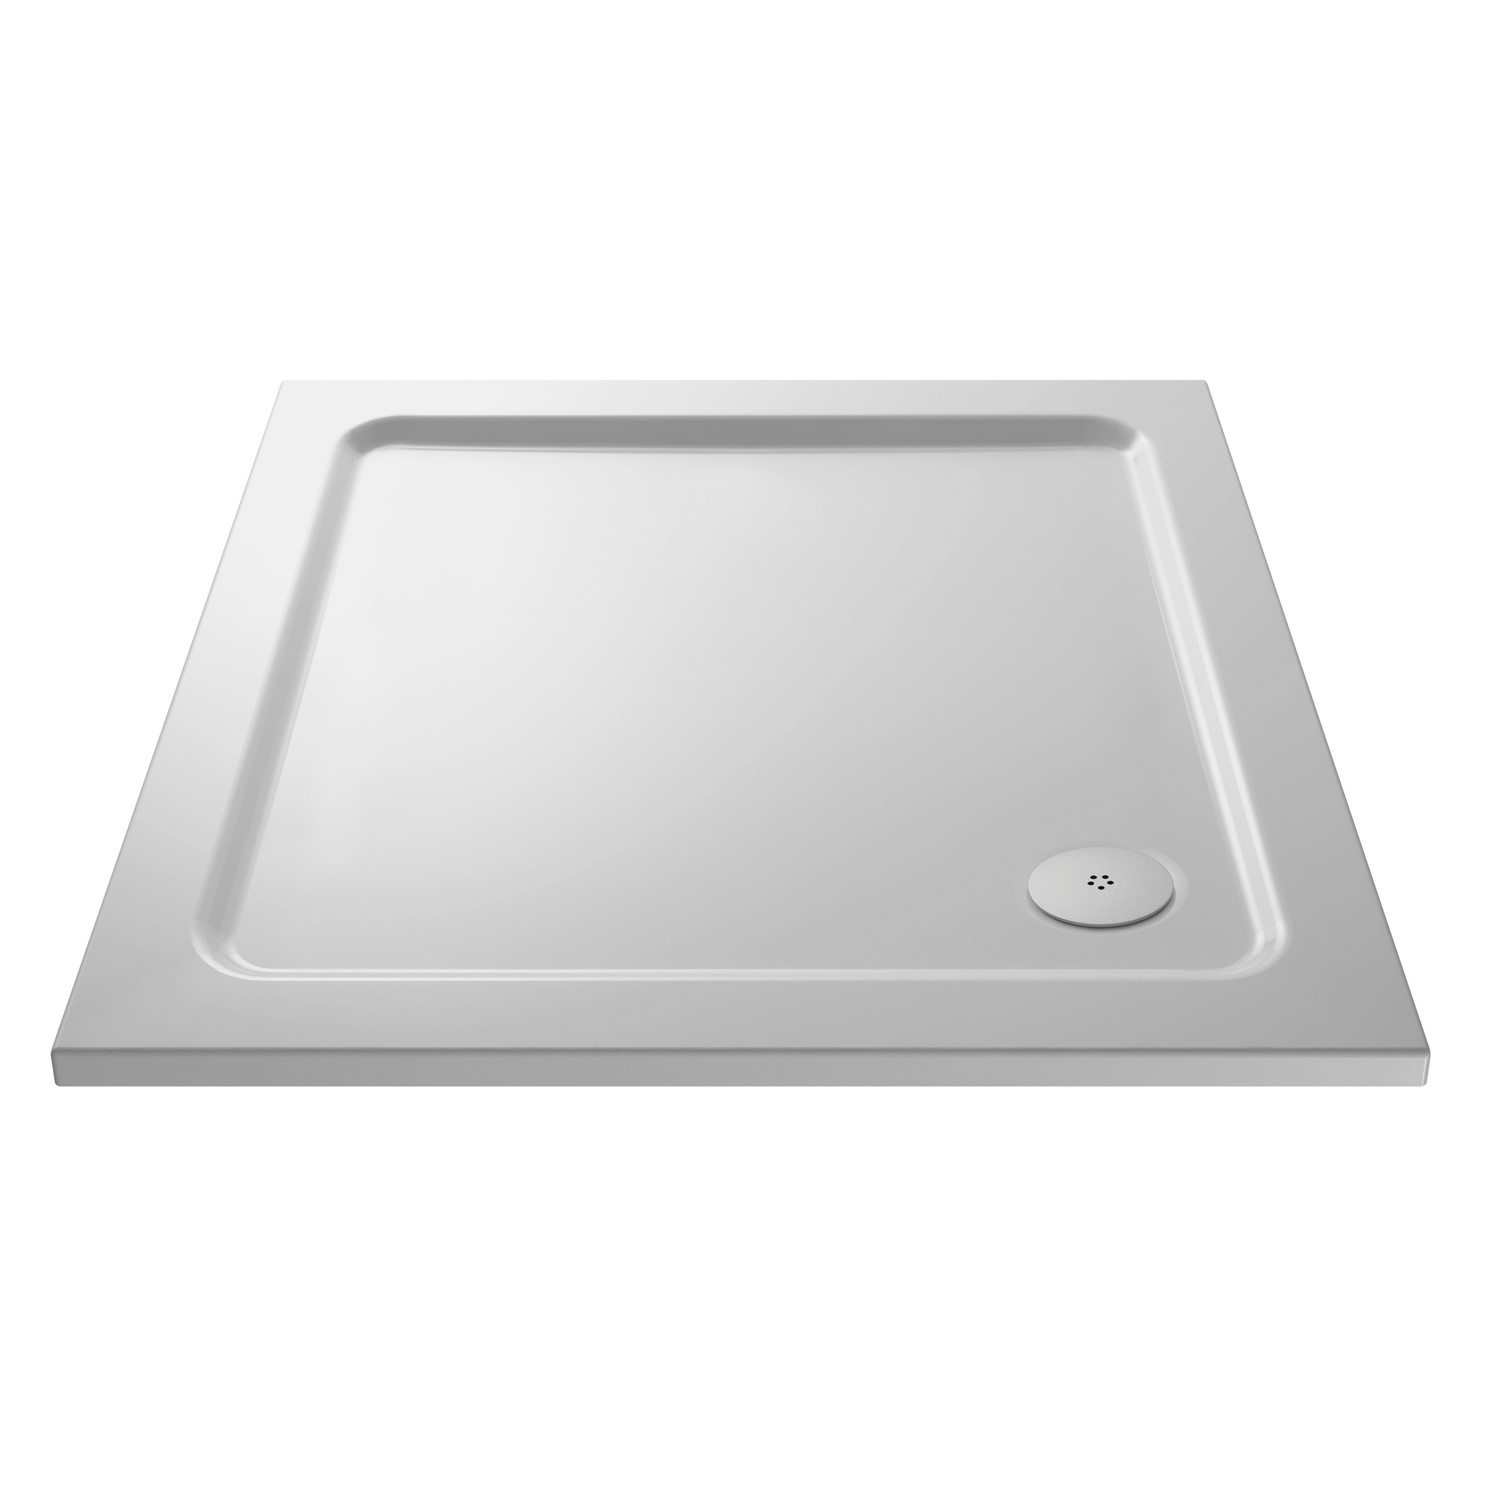 Low Profile Shower Tray 700 x 700mm - Purity